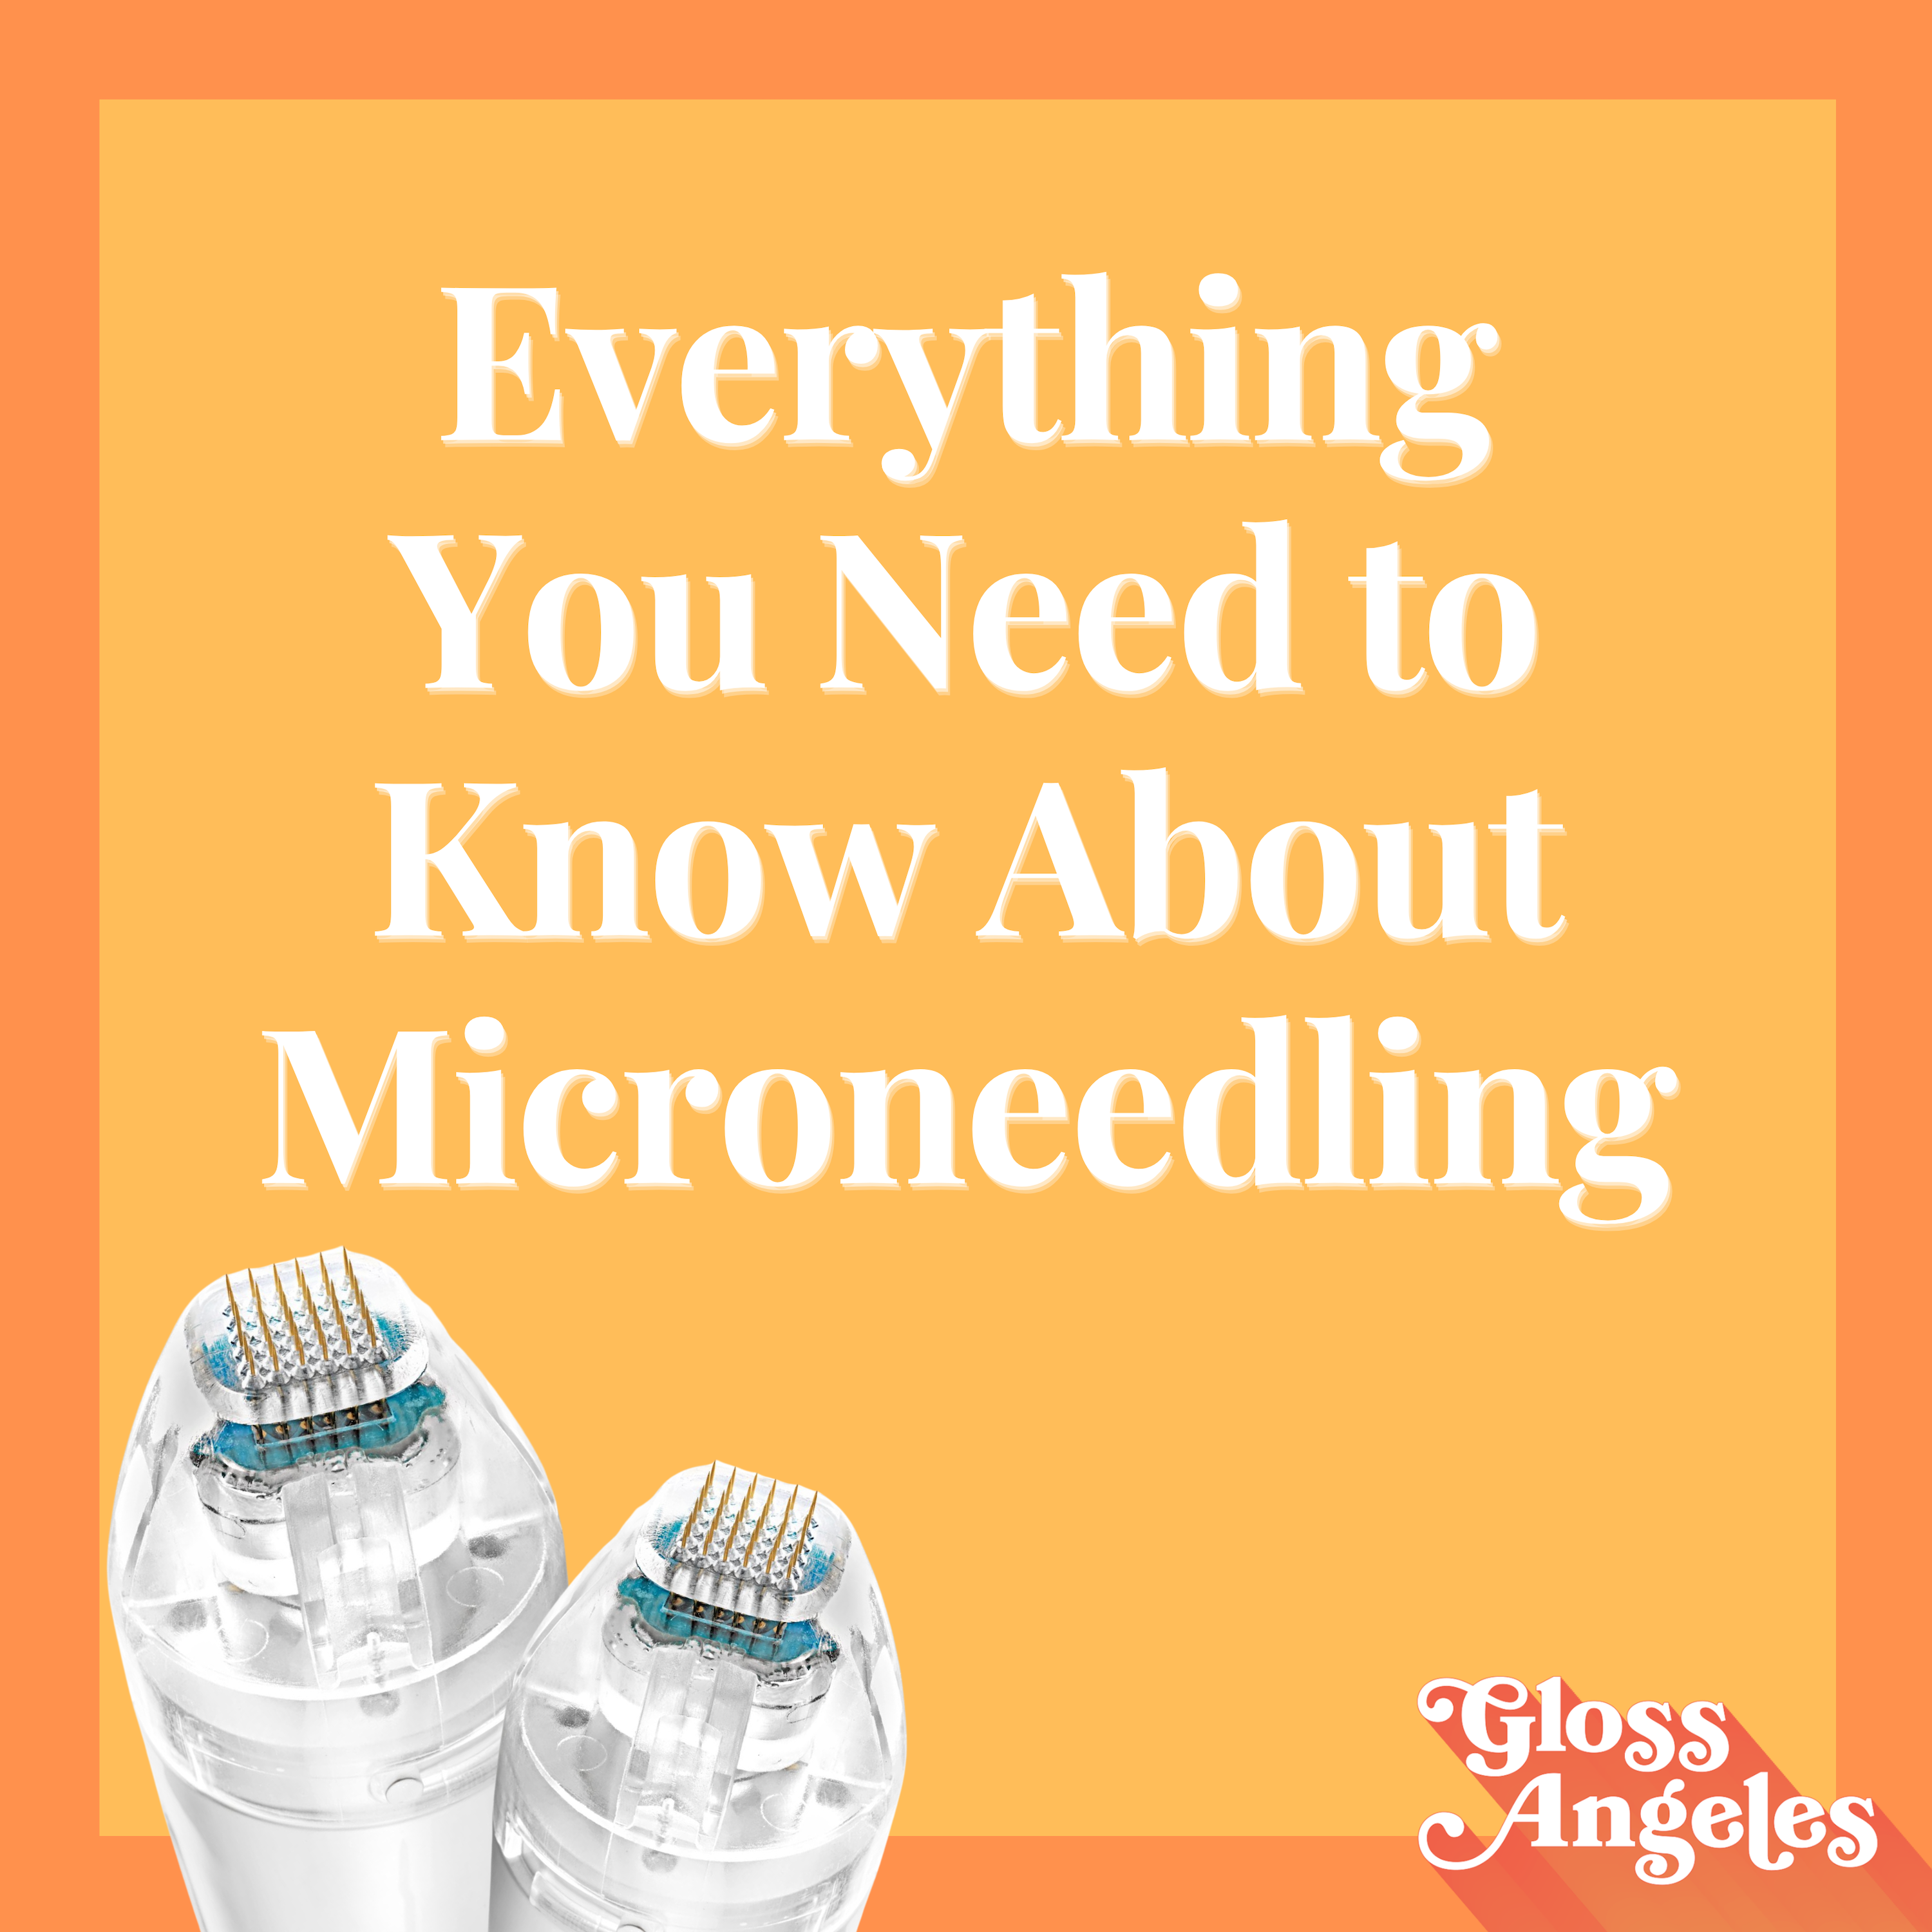 Everything You Need to Know About Microneedling with Dr. Ava Shamban